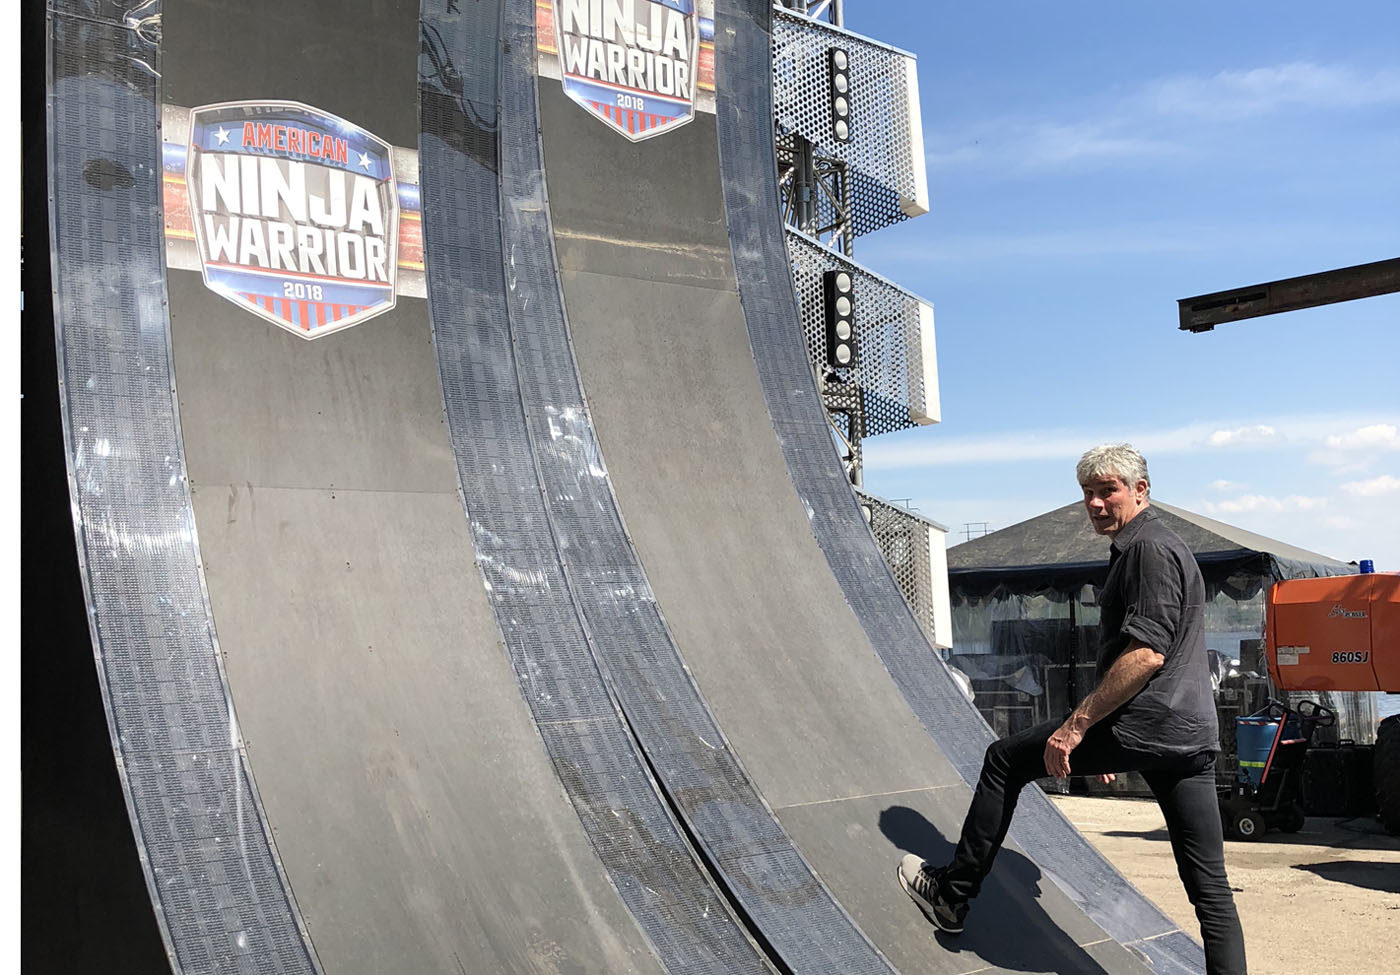 Ben Ratner's photo of Playing with Science host Gary O’Reilly and “The Warped Wall” from American Ninja Warrior.